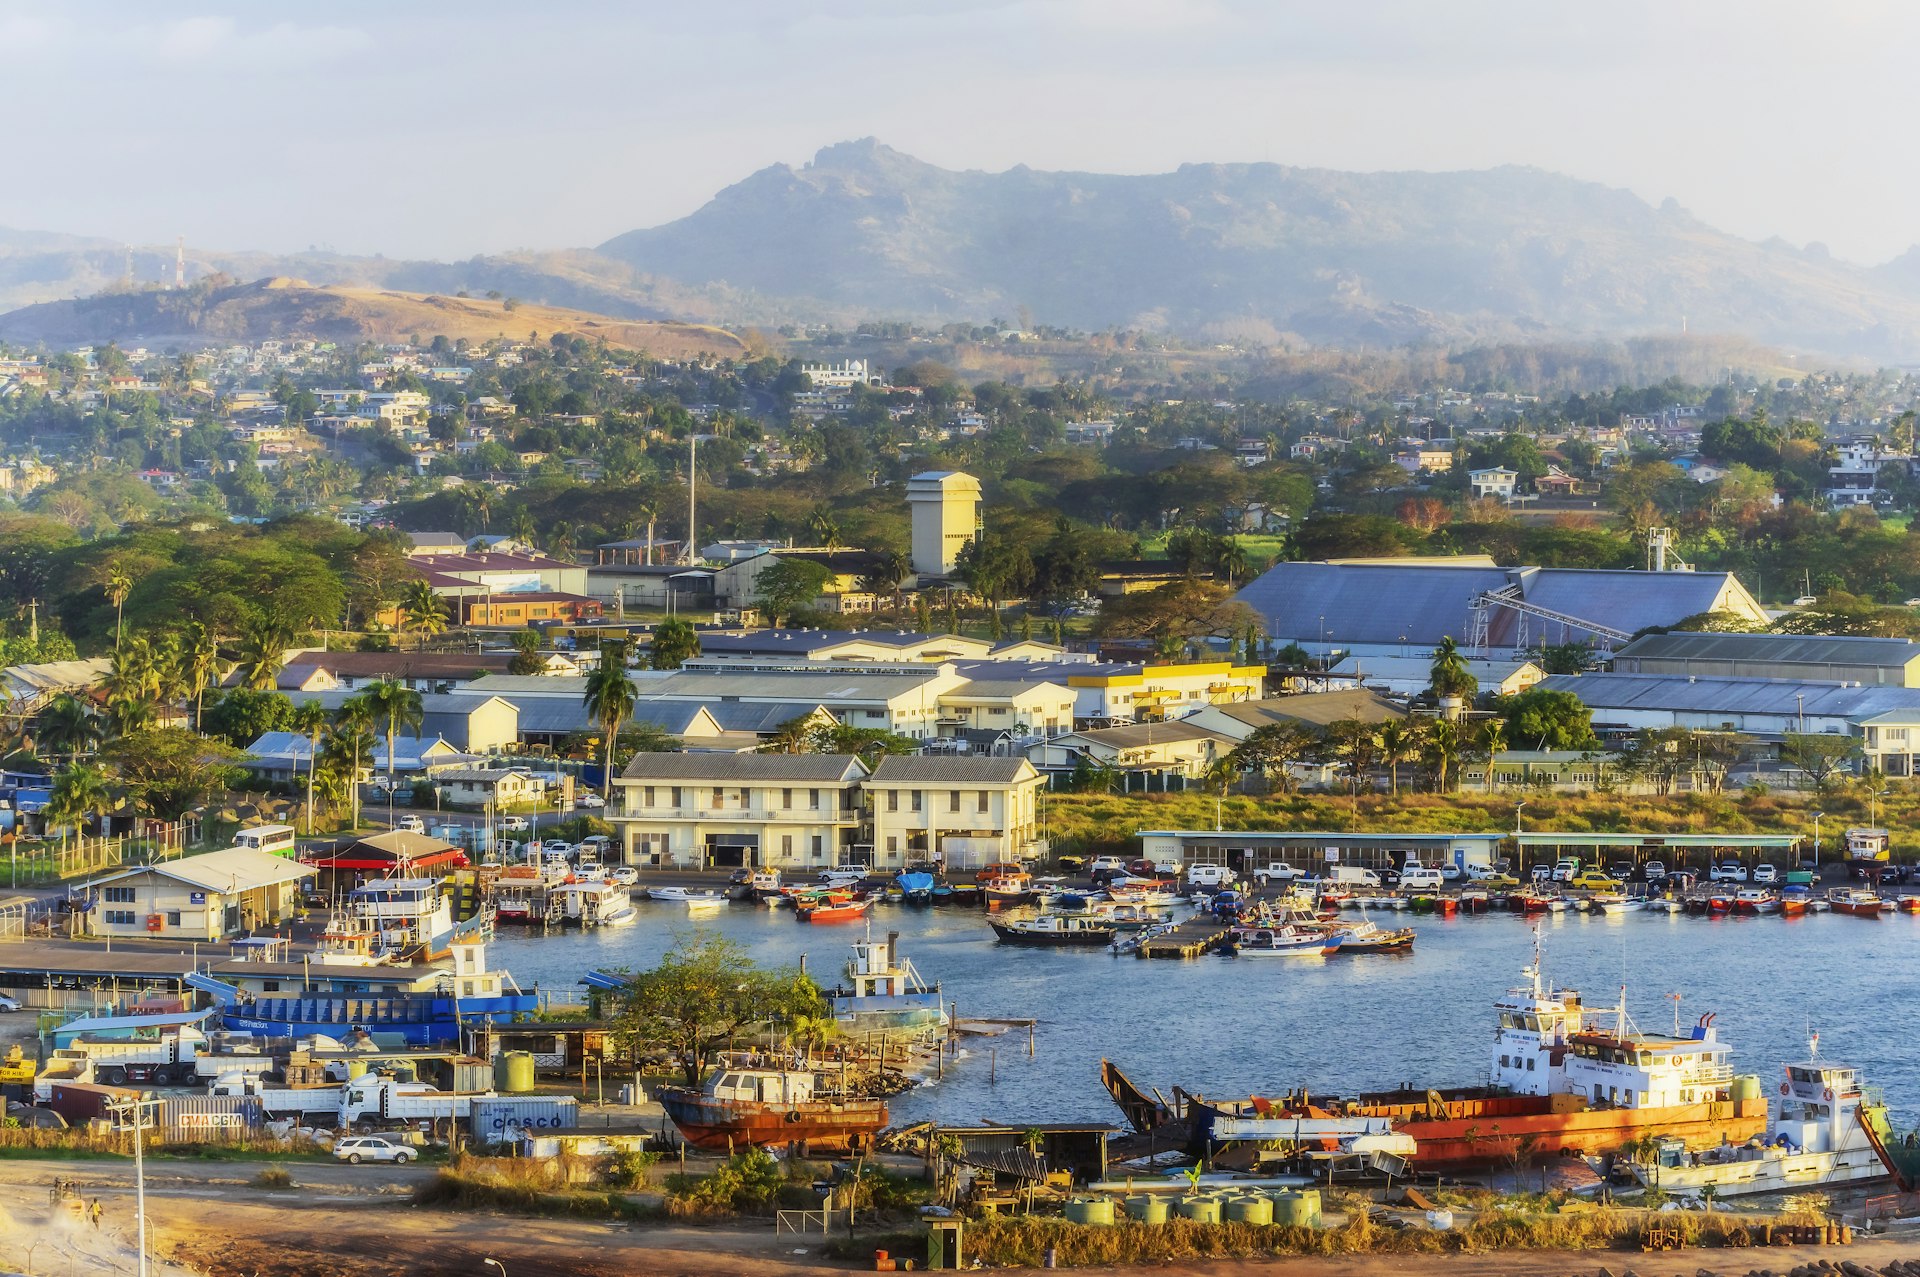 An aerial view of Lautoka, Fiji, with buildings and a harbor in the foreground and a mountain in the background